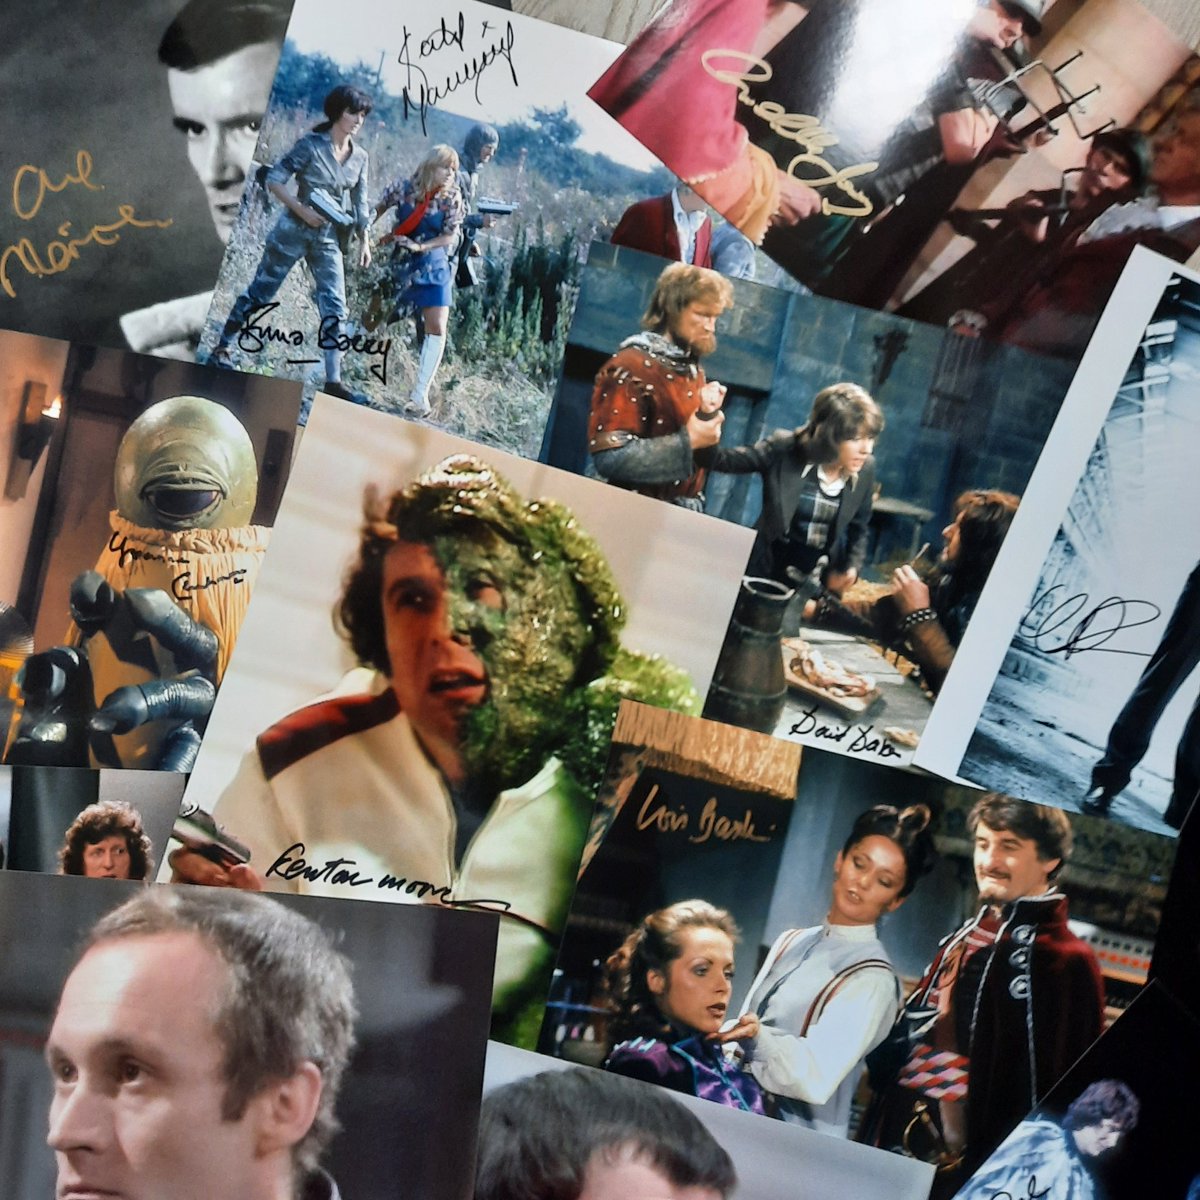 Lots of #autographs going out in the post! Take a look at our eBay store for all the latest #CultTV, #Film, and #DoctorWho signed photos and merchandise! ebay.co.uk/str/fantomauto… #AFTAL registered, genuine autographs guaranteed! #eBay #Signed #DoctorWho60 #DoctorWhoEvents